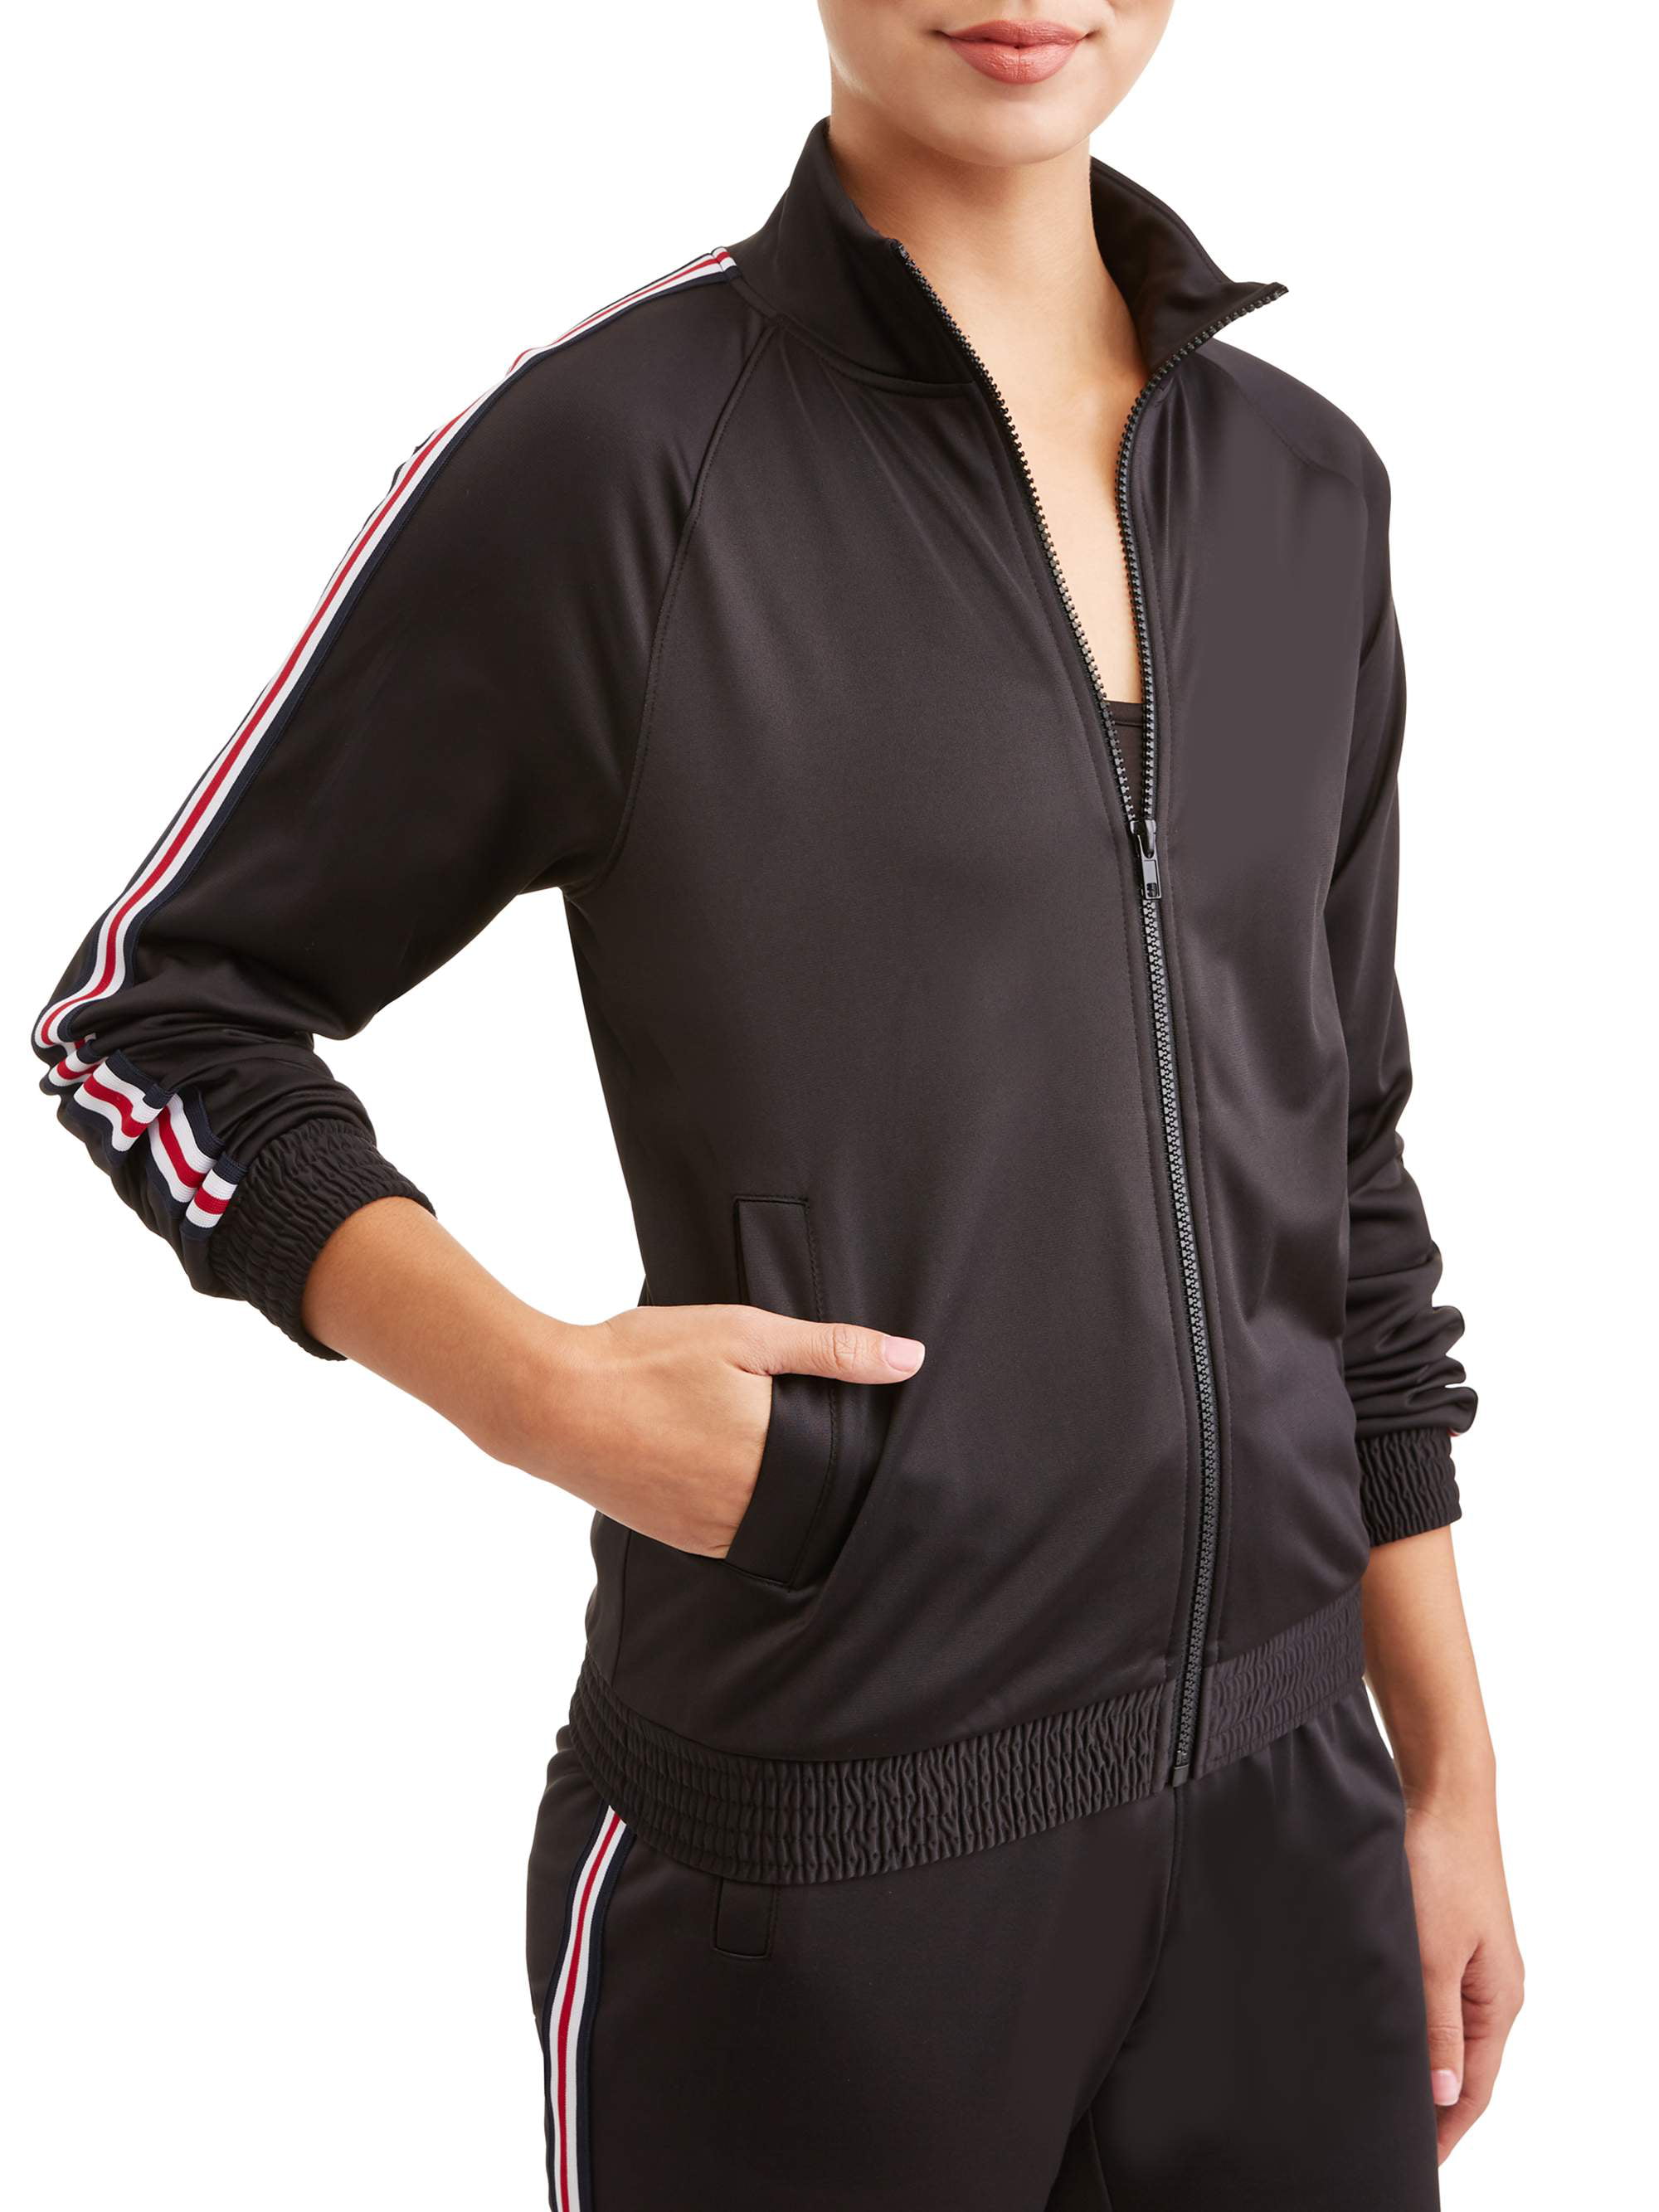 Women's Active Tricot Track Jacket with Athletic Stripe - Walmart.com